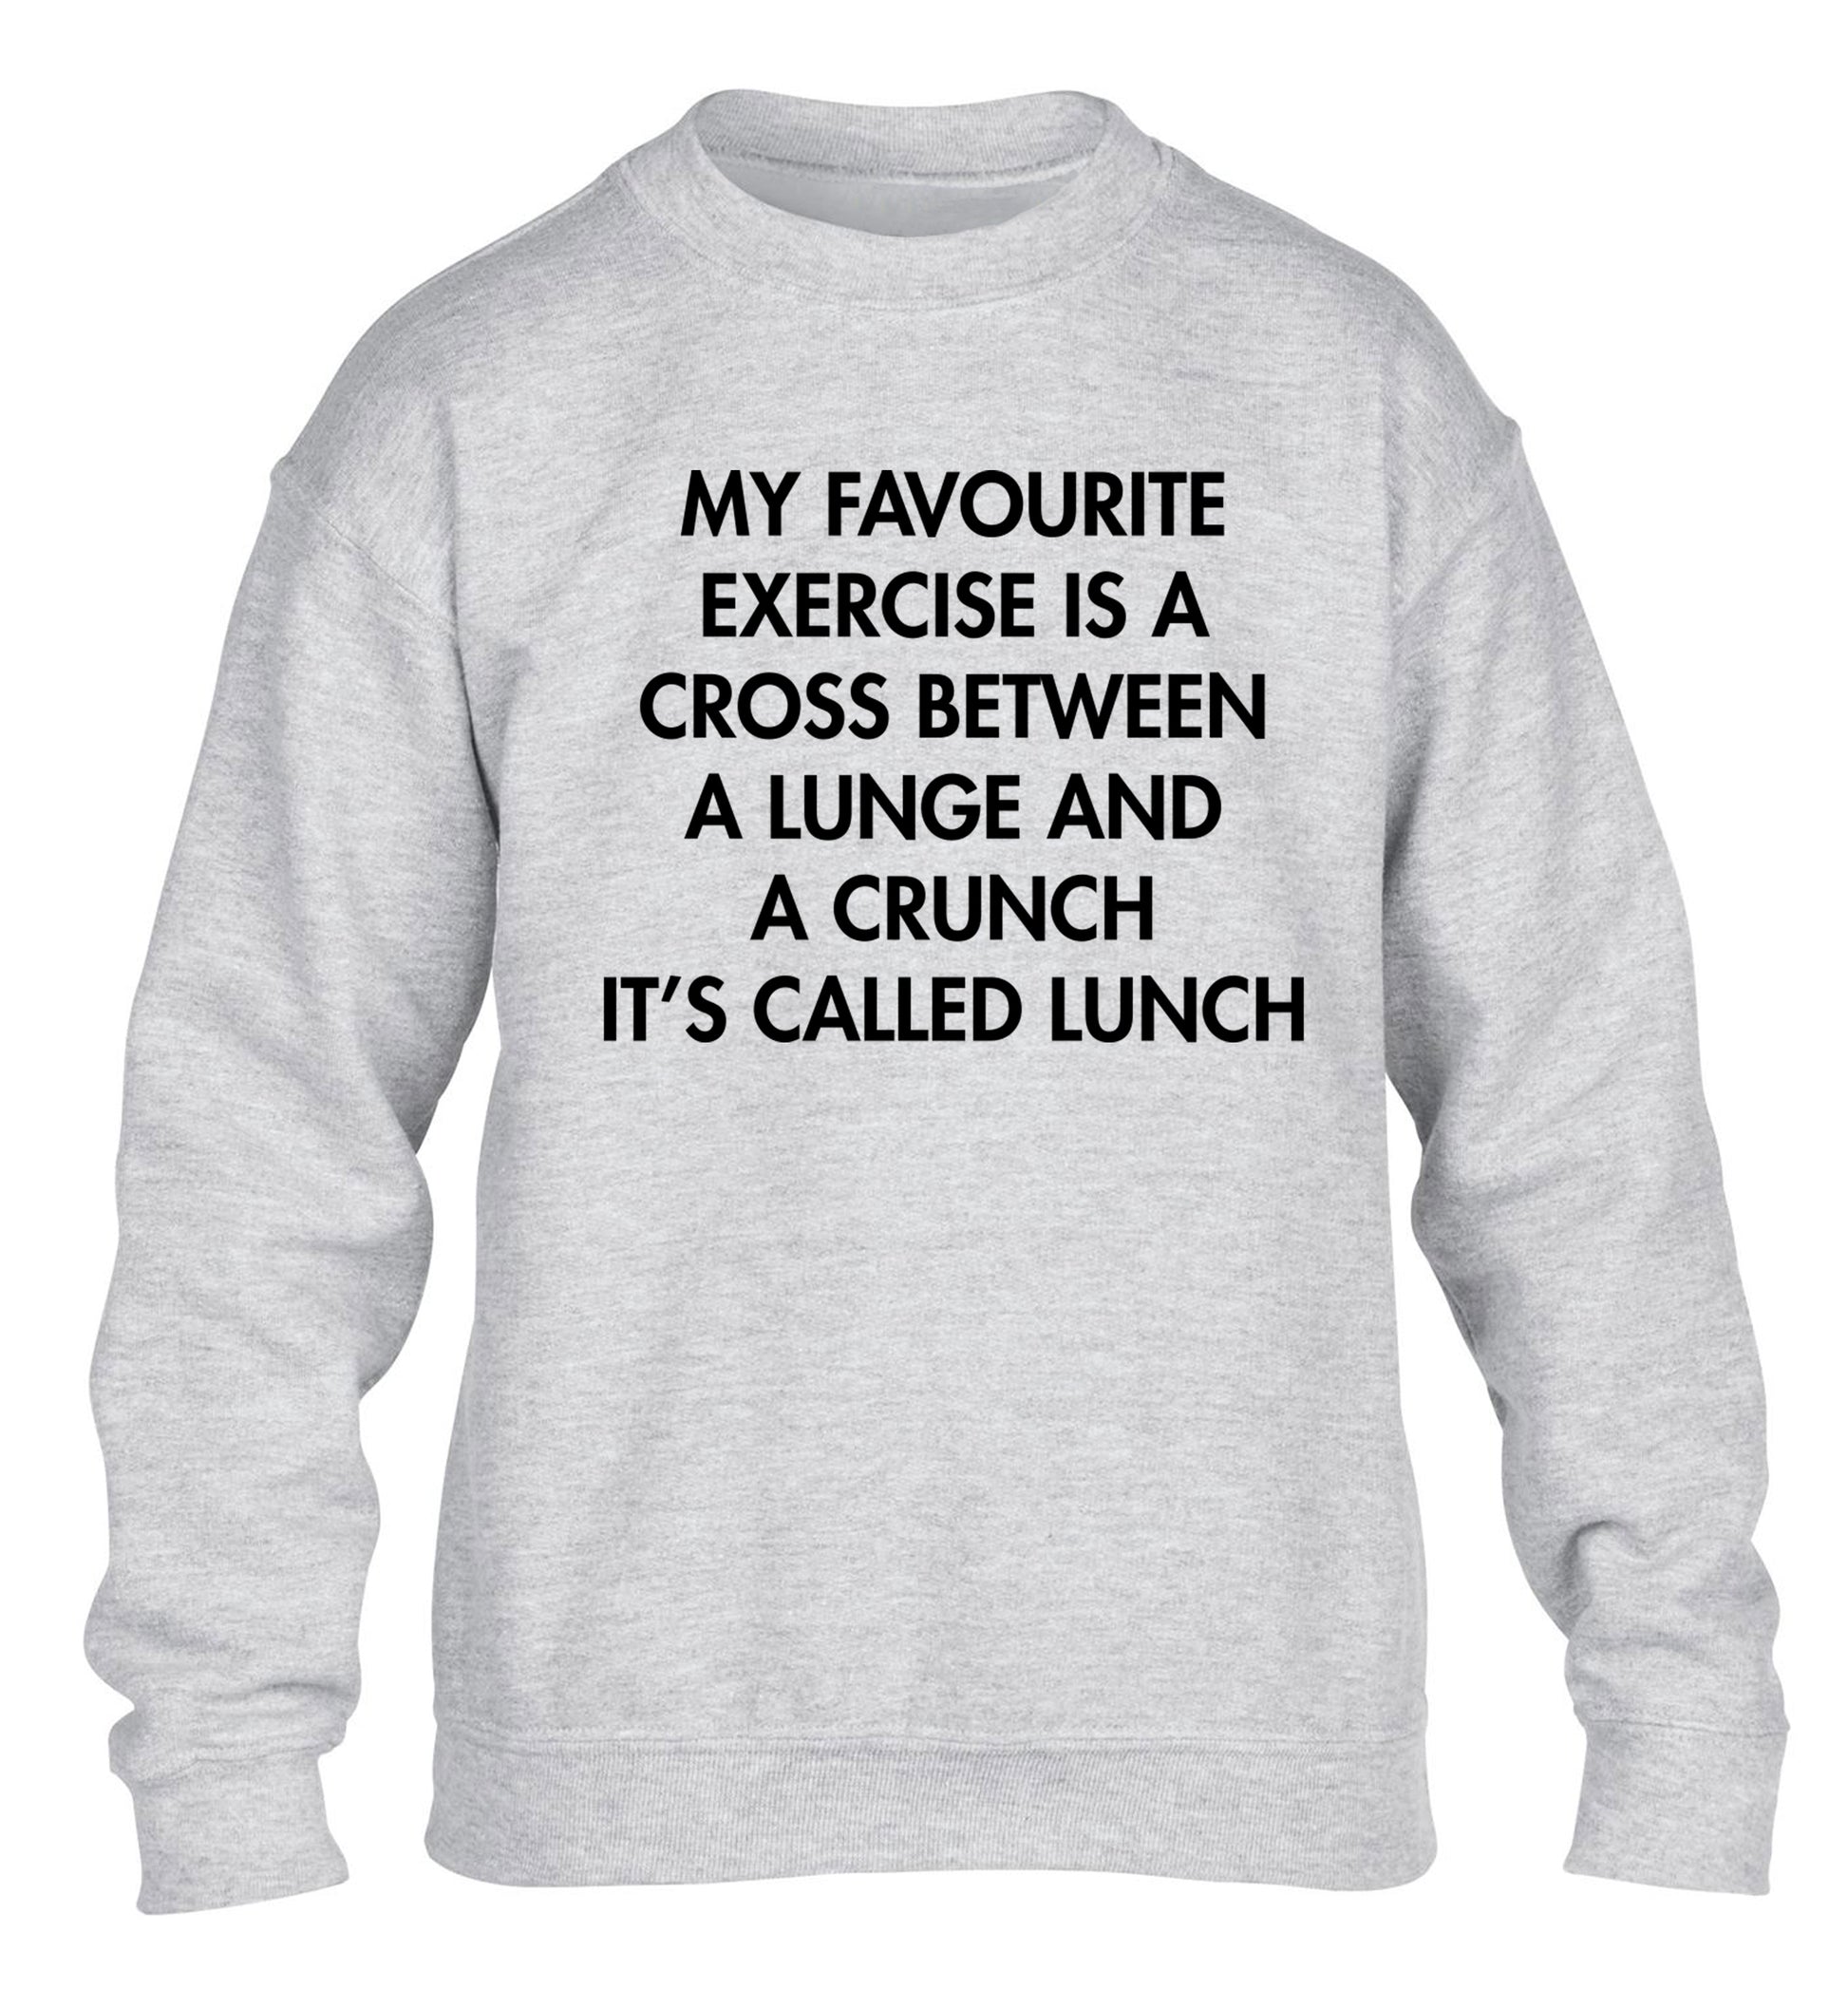 My favourite exercise is a cross between a lung and a crunch it's called lunch children's grey sweater 12-14 Years